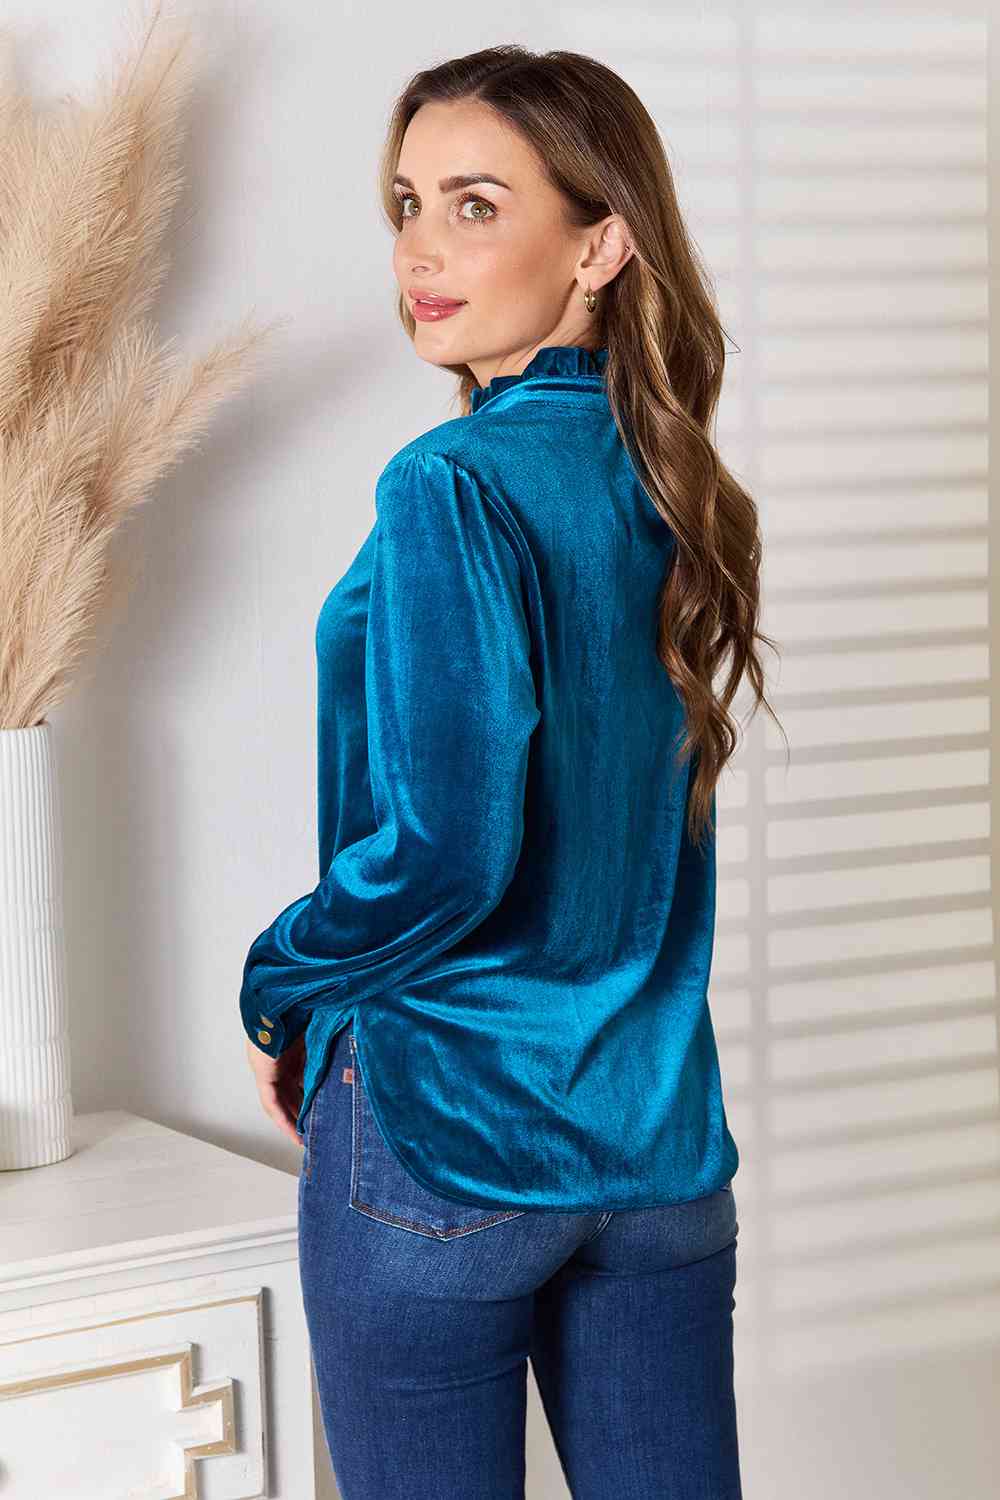 The Double Take Blouse